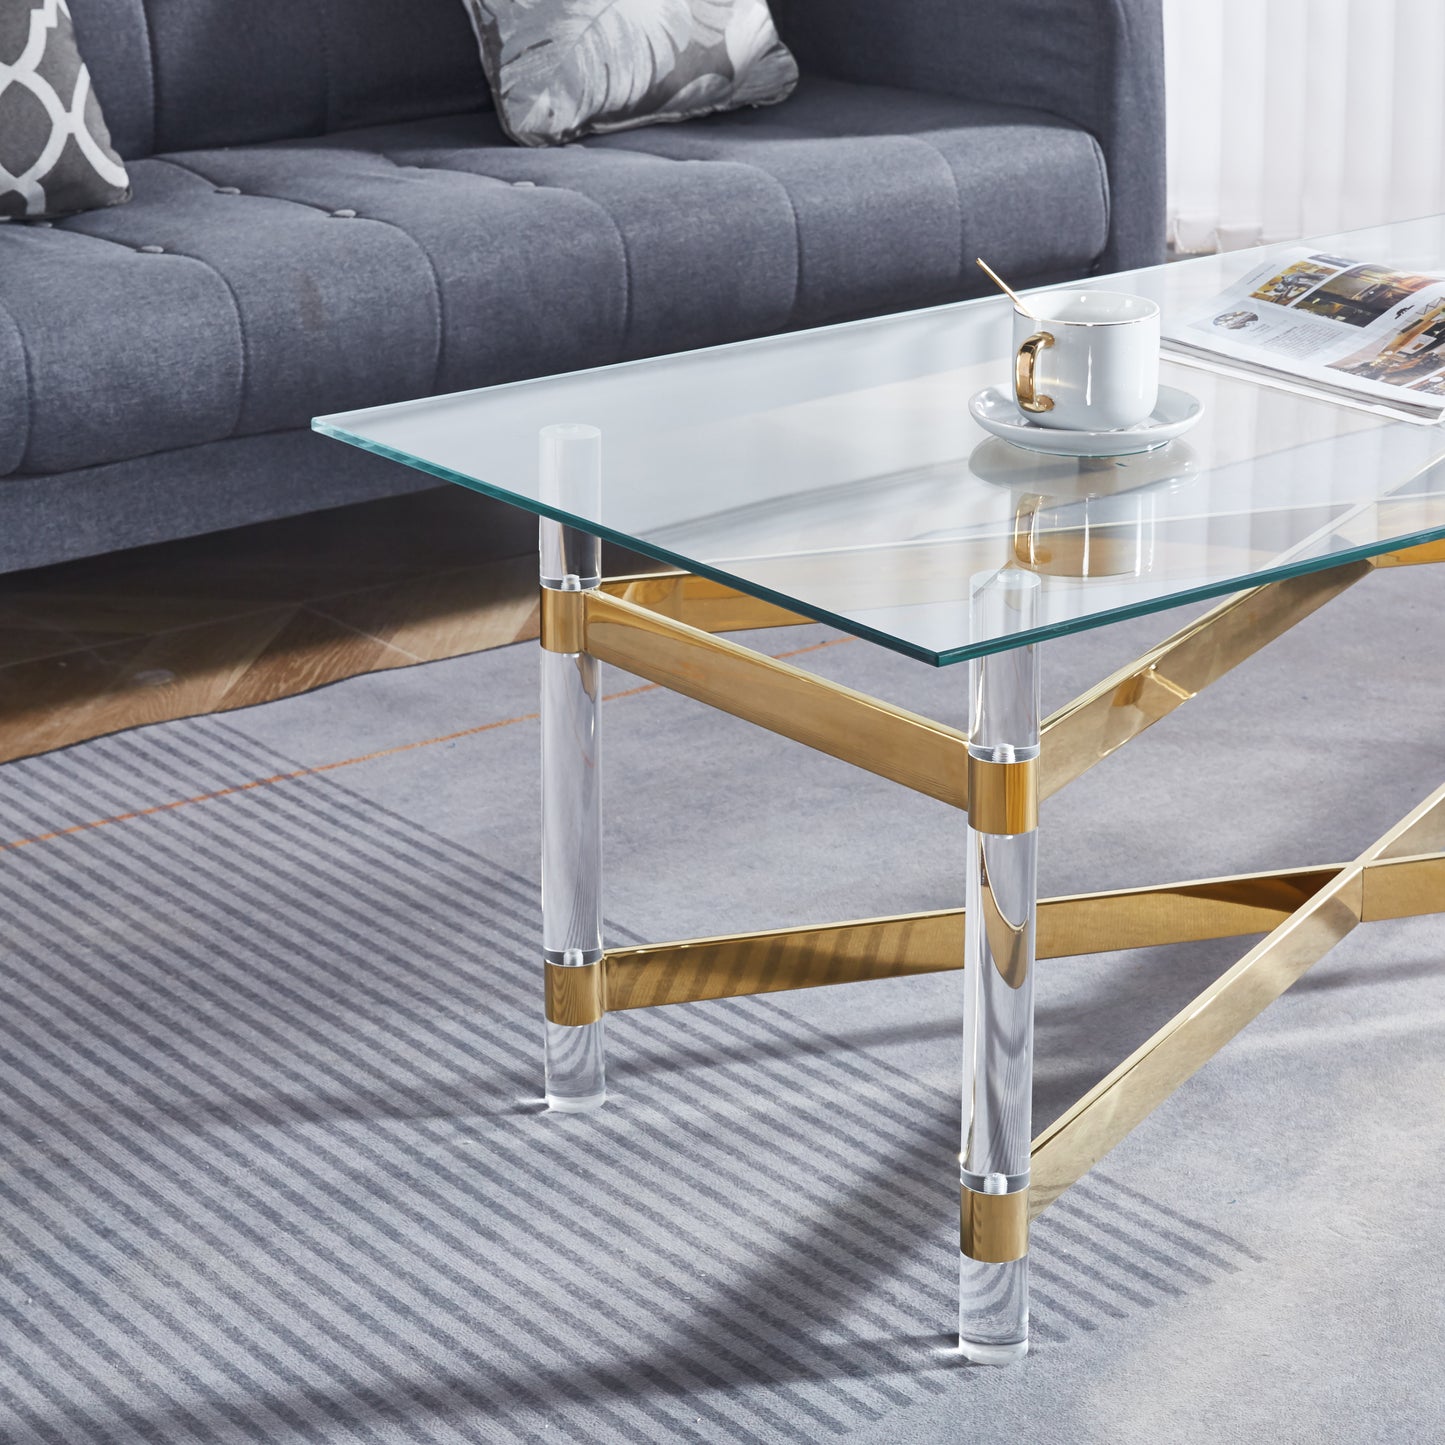 Gold Stainless Steel Coffee Table With Acrylic Frame and Clear Glass Top - Modern American Design (CS-1197)